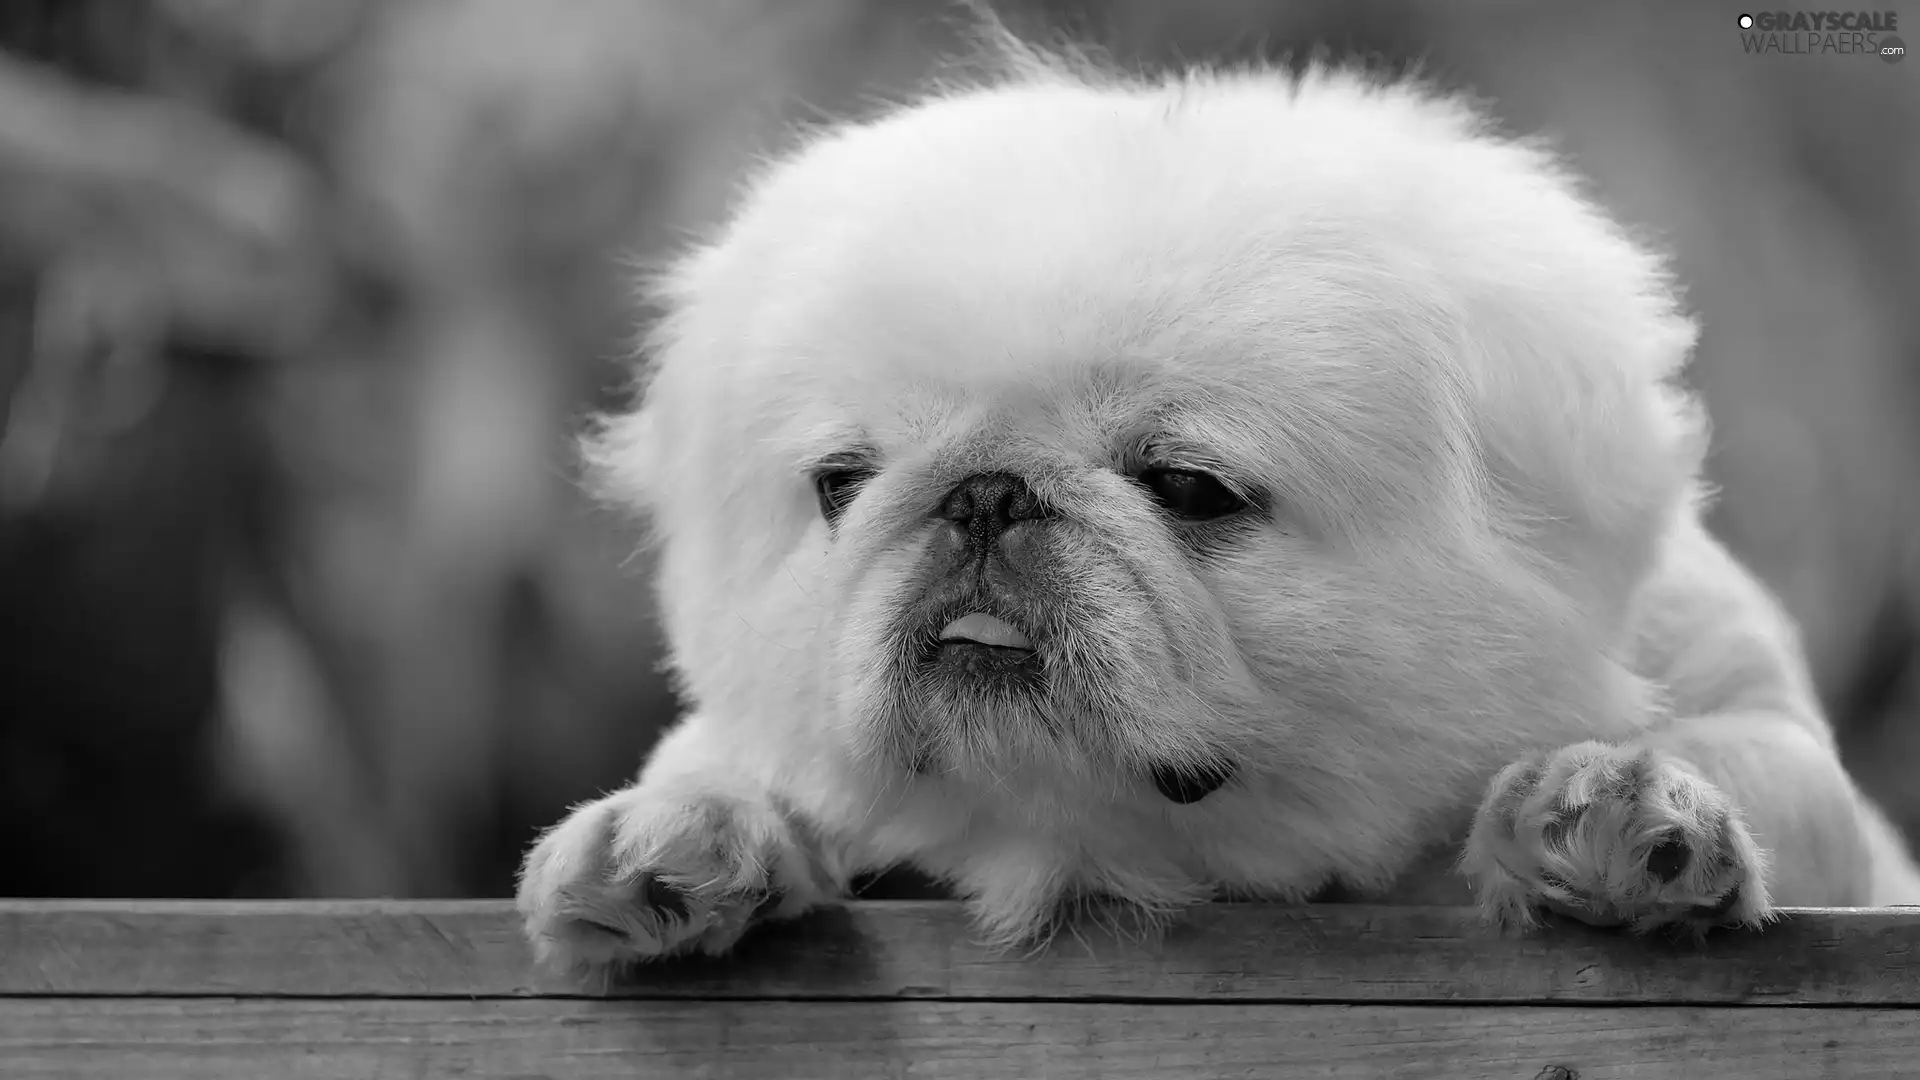 Puppy, White, paws, doggy, fluffy, Tounge, board